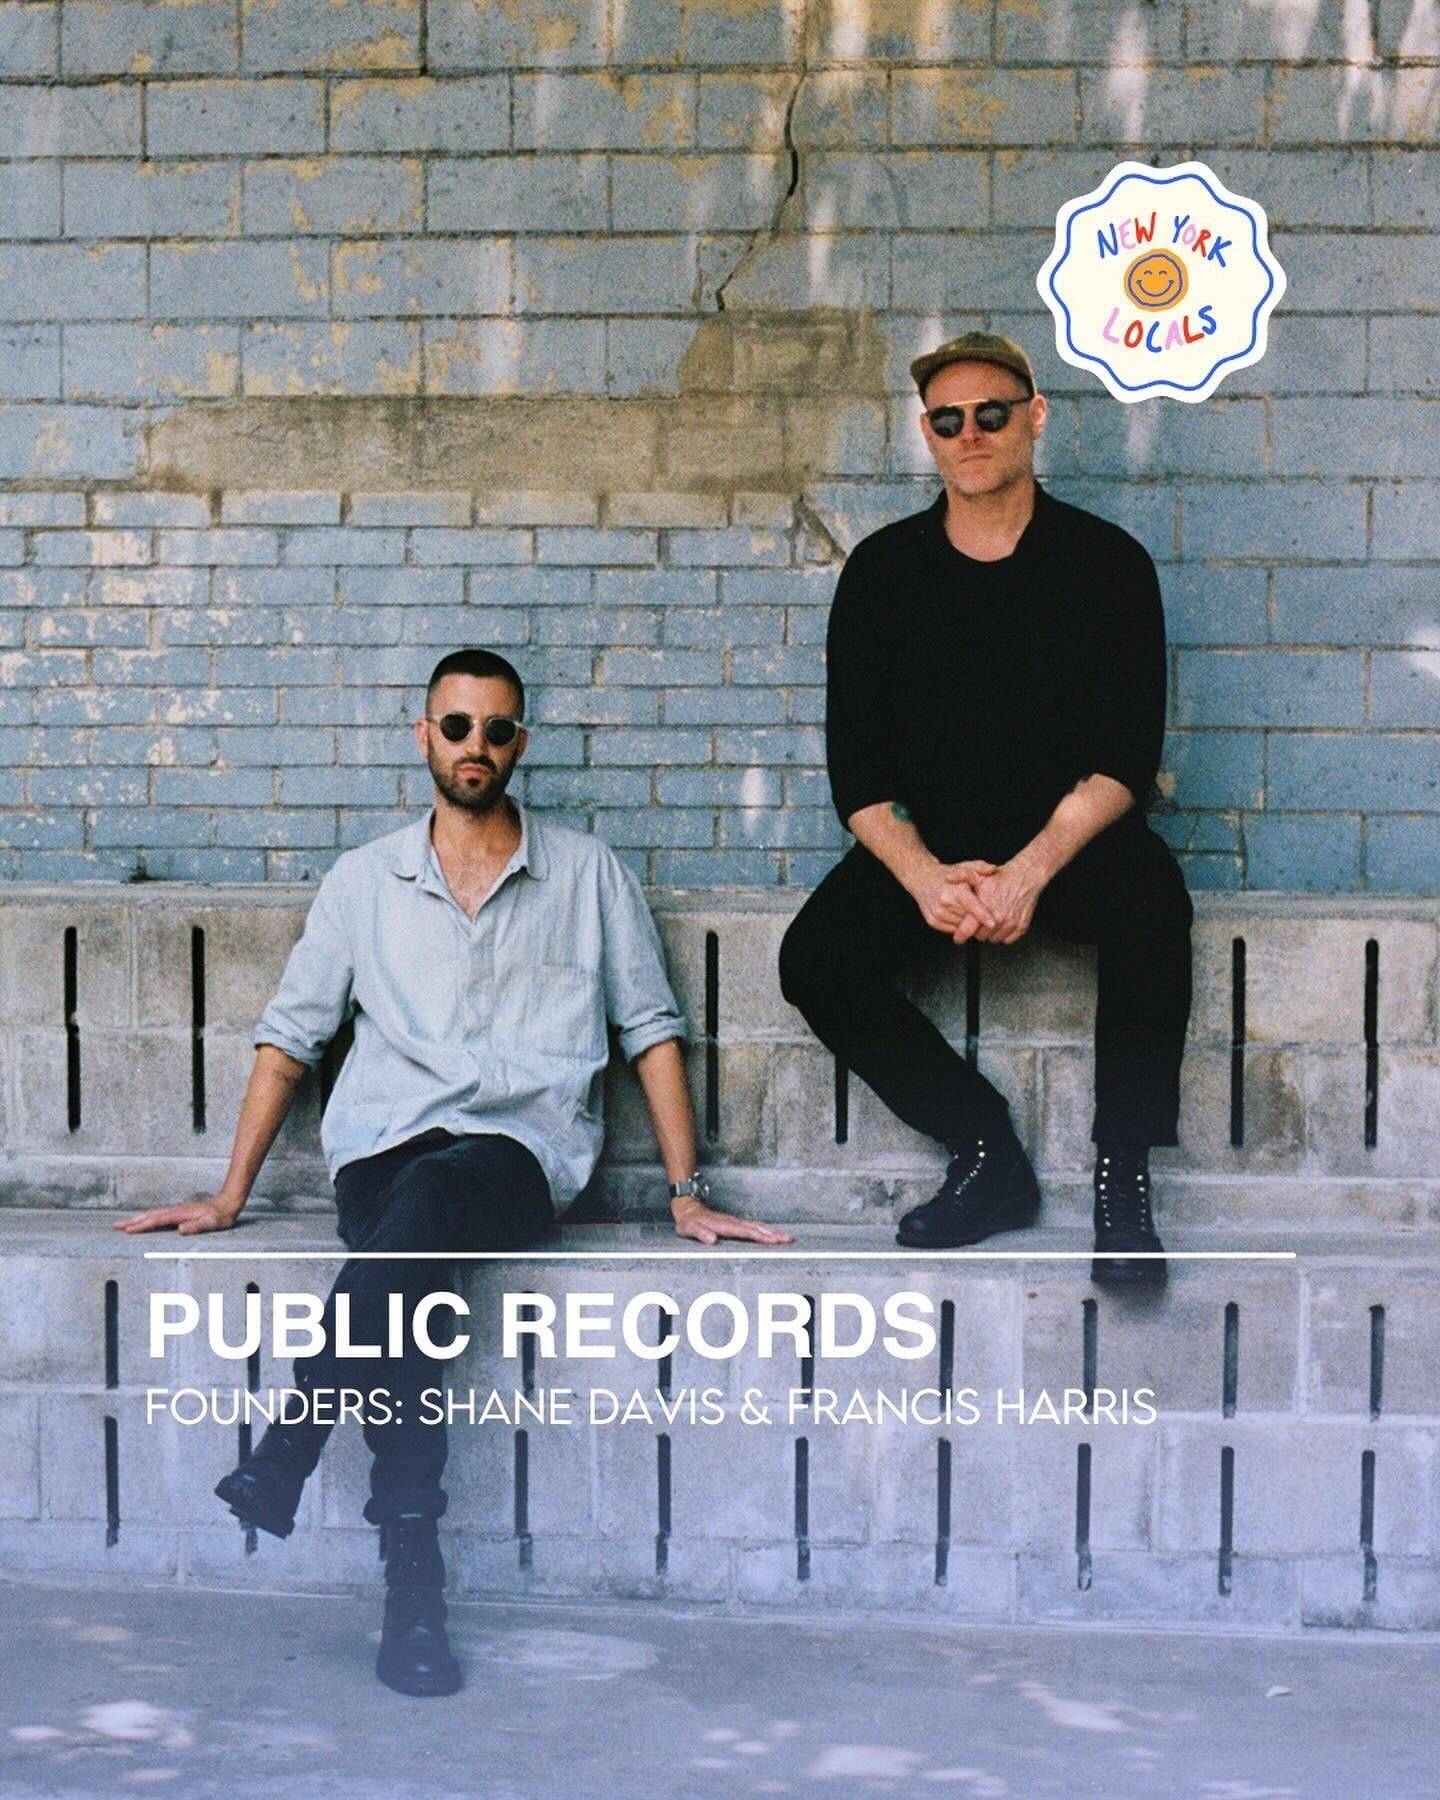 Public Records (@publicrecordsnyc) is a unique and distinct multidisciplinary venue, event space, restaurant, and record shop in one. 🎶🍽️☕ Founded with a keen curatorial eye by Shane Davis (@shaneevandavis) and Francis Harris (francisscissor), thei